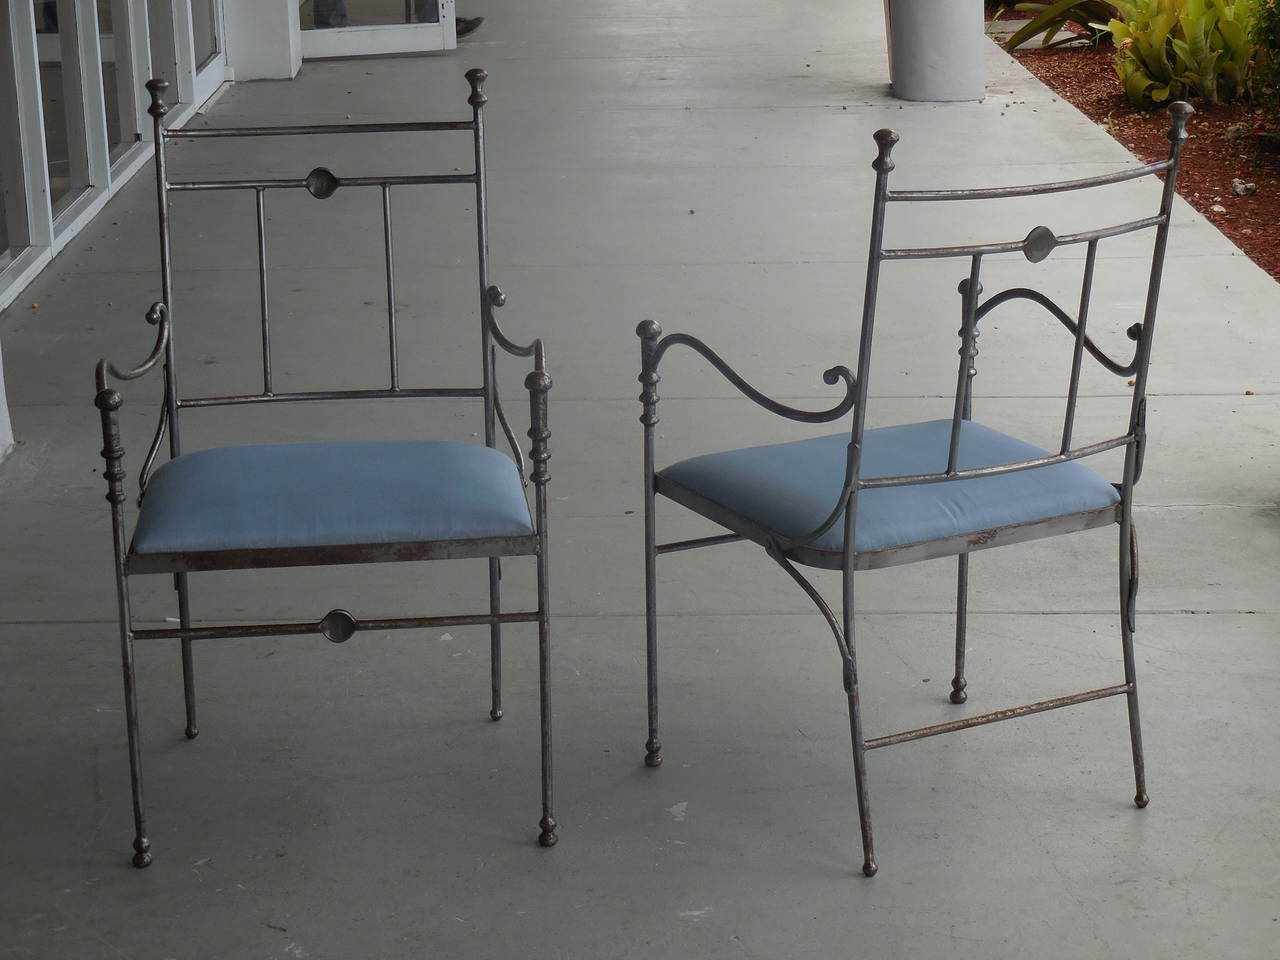 Exquisite pair of chairs. hand-forged steel. Striking sculptural elements. Signed on back.